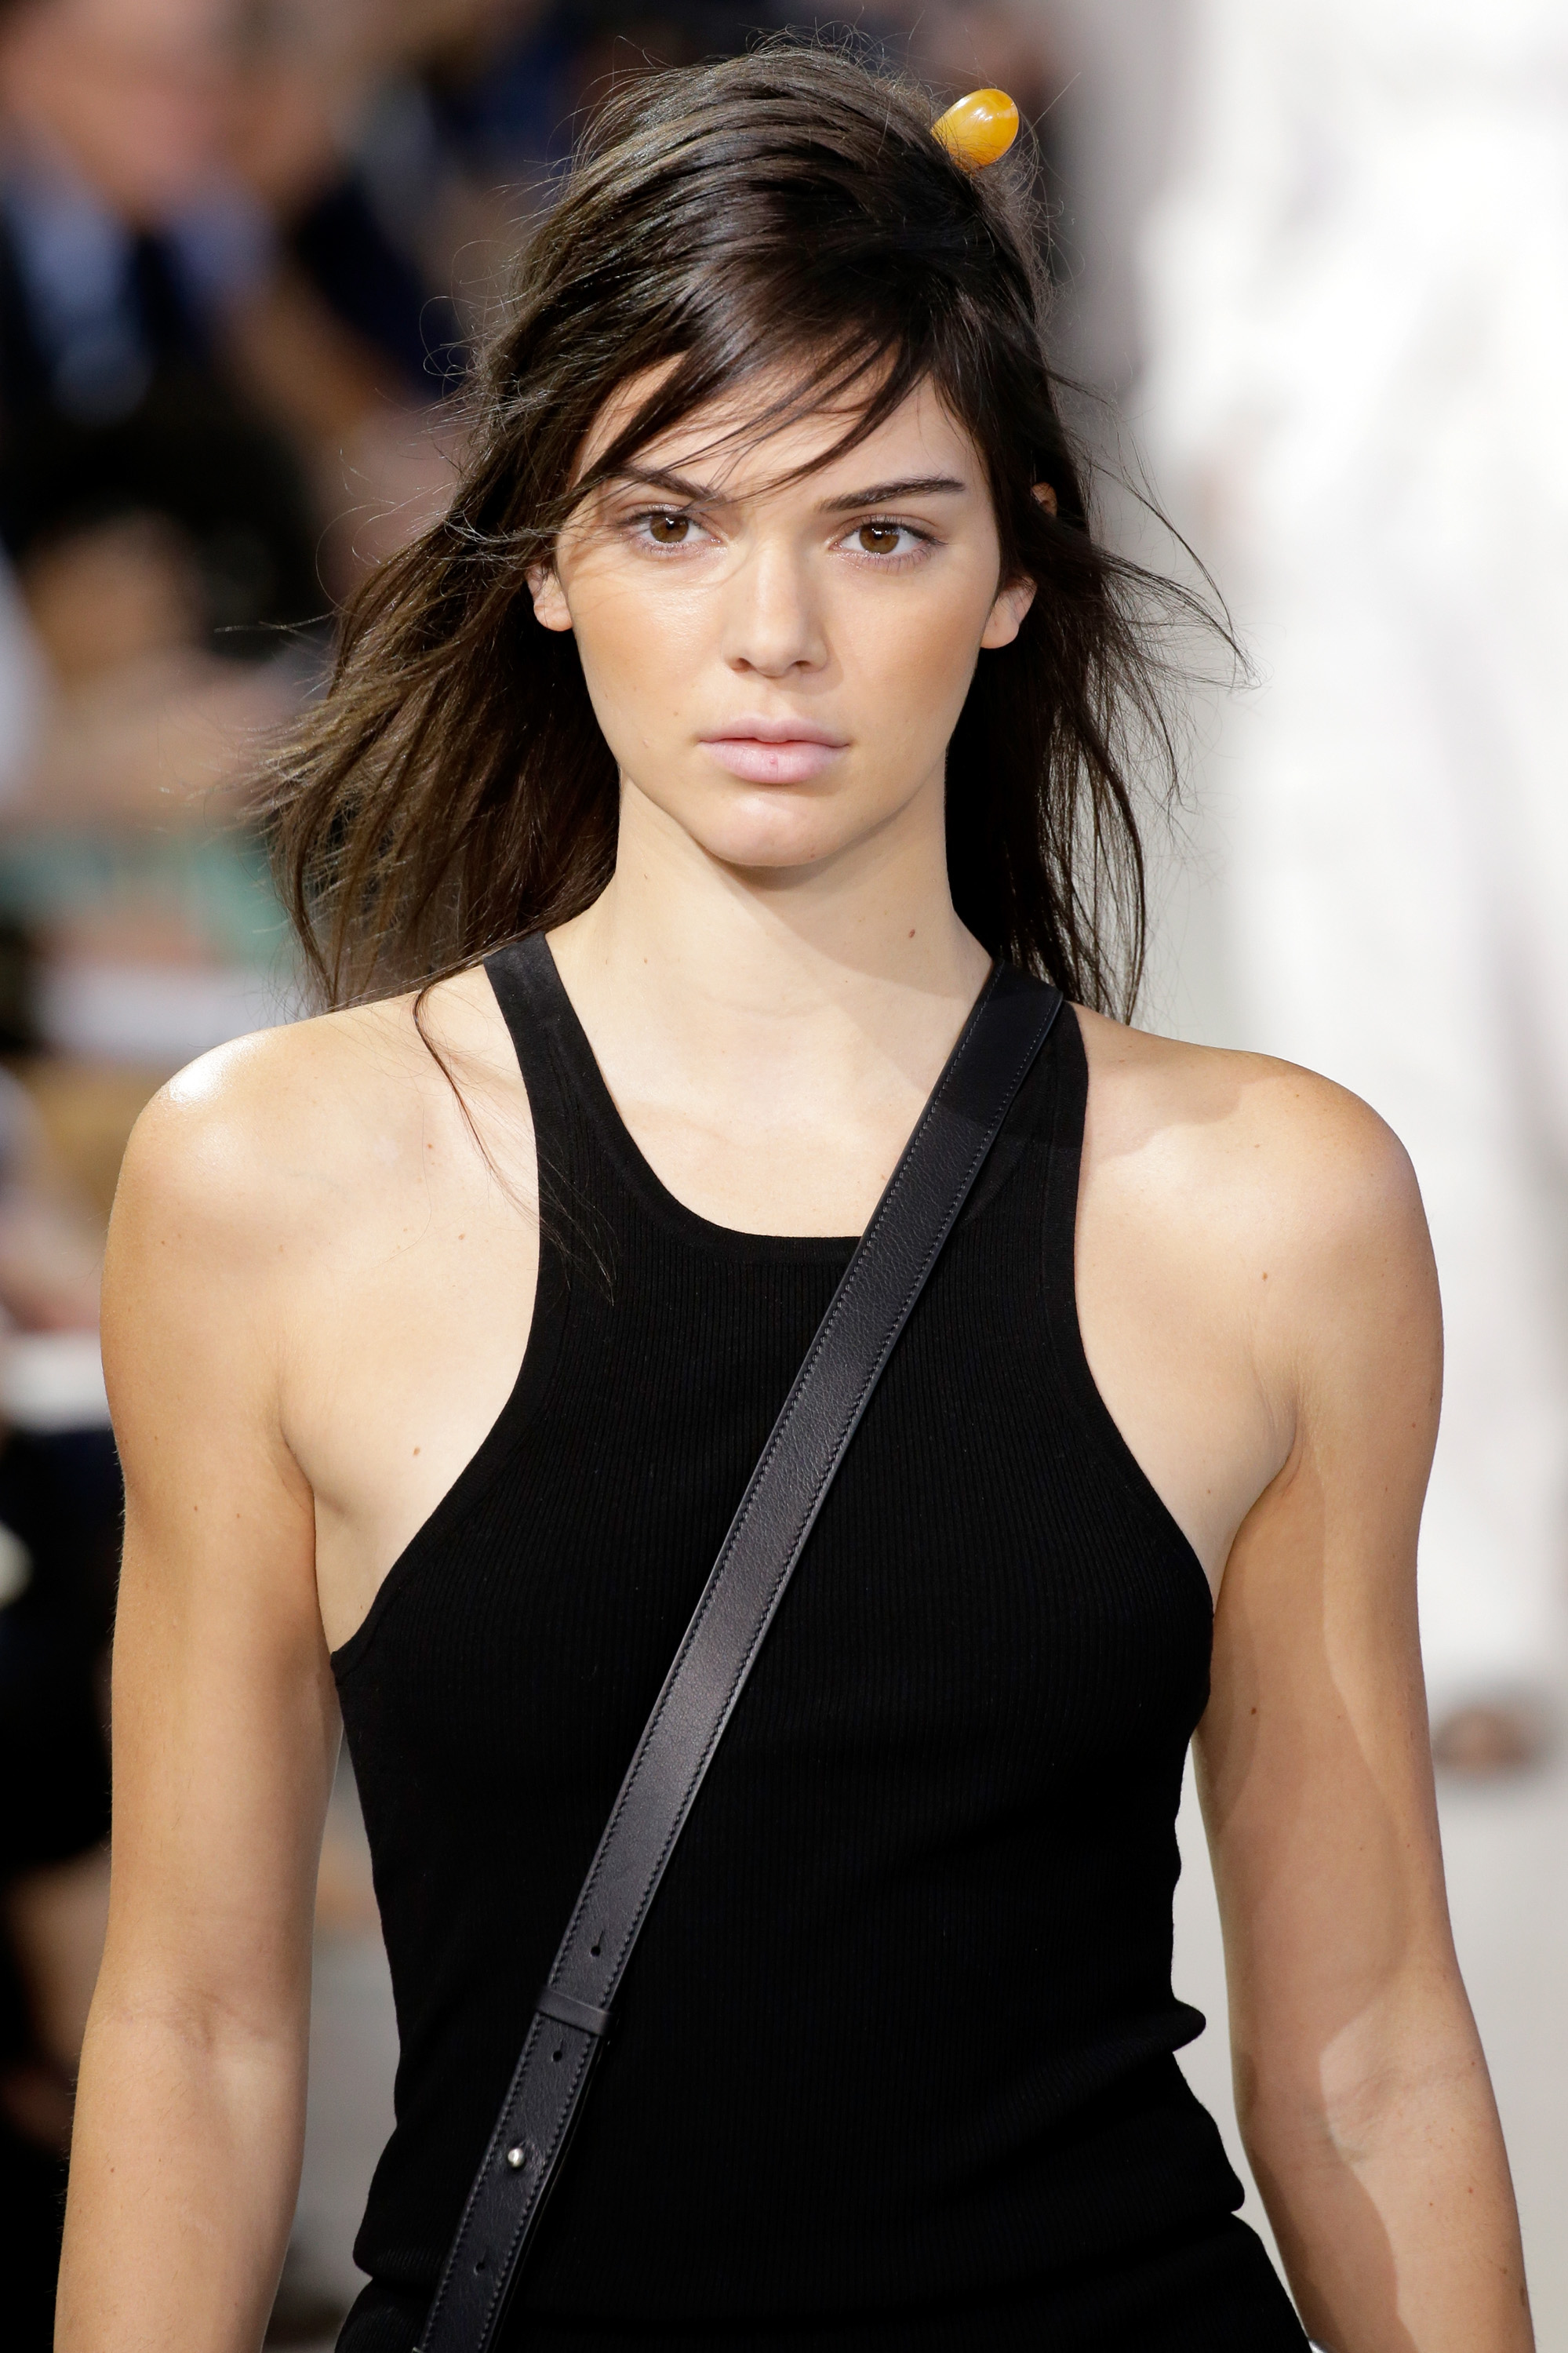 Kendall Jenner is the new face of Michael Kors